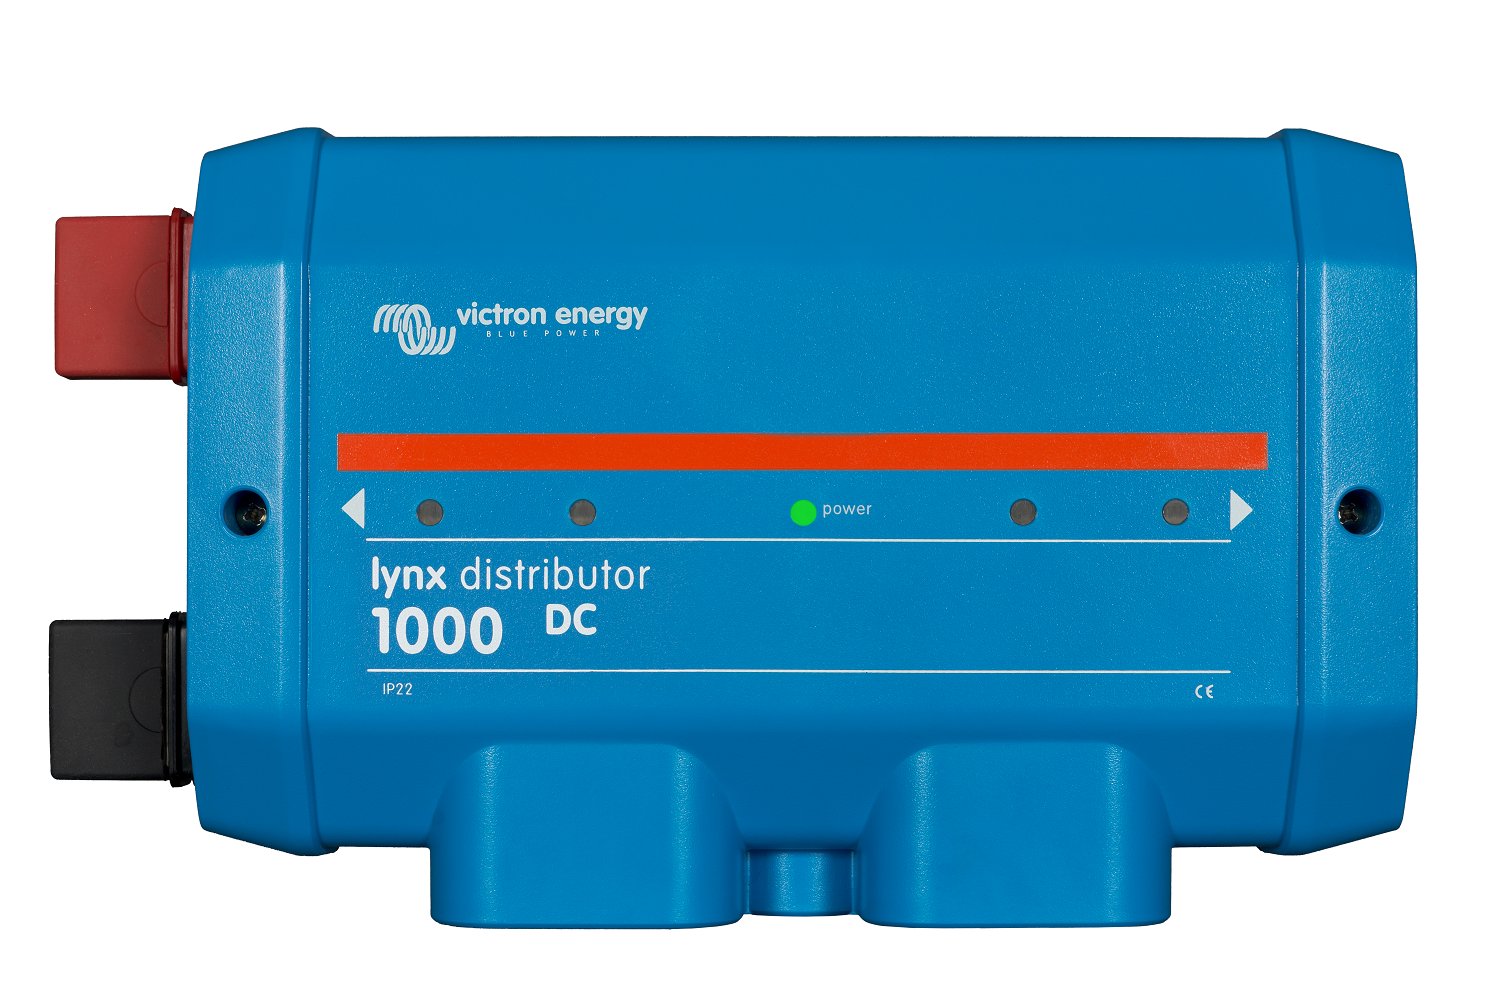 What system voltage can the Lynx Distributor be used with?